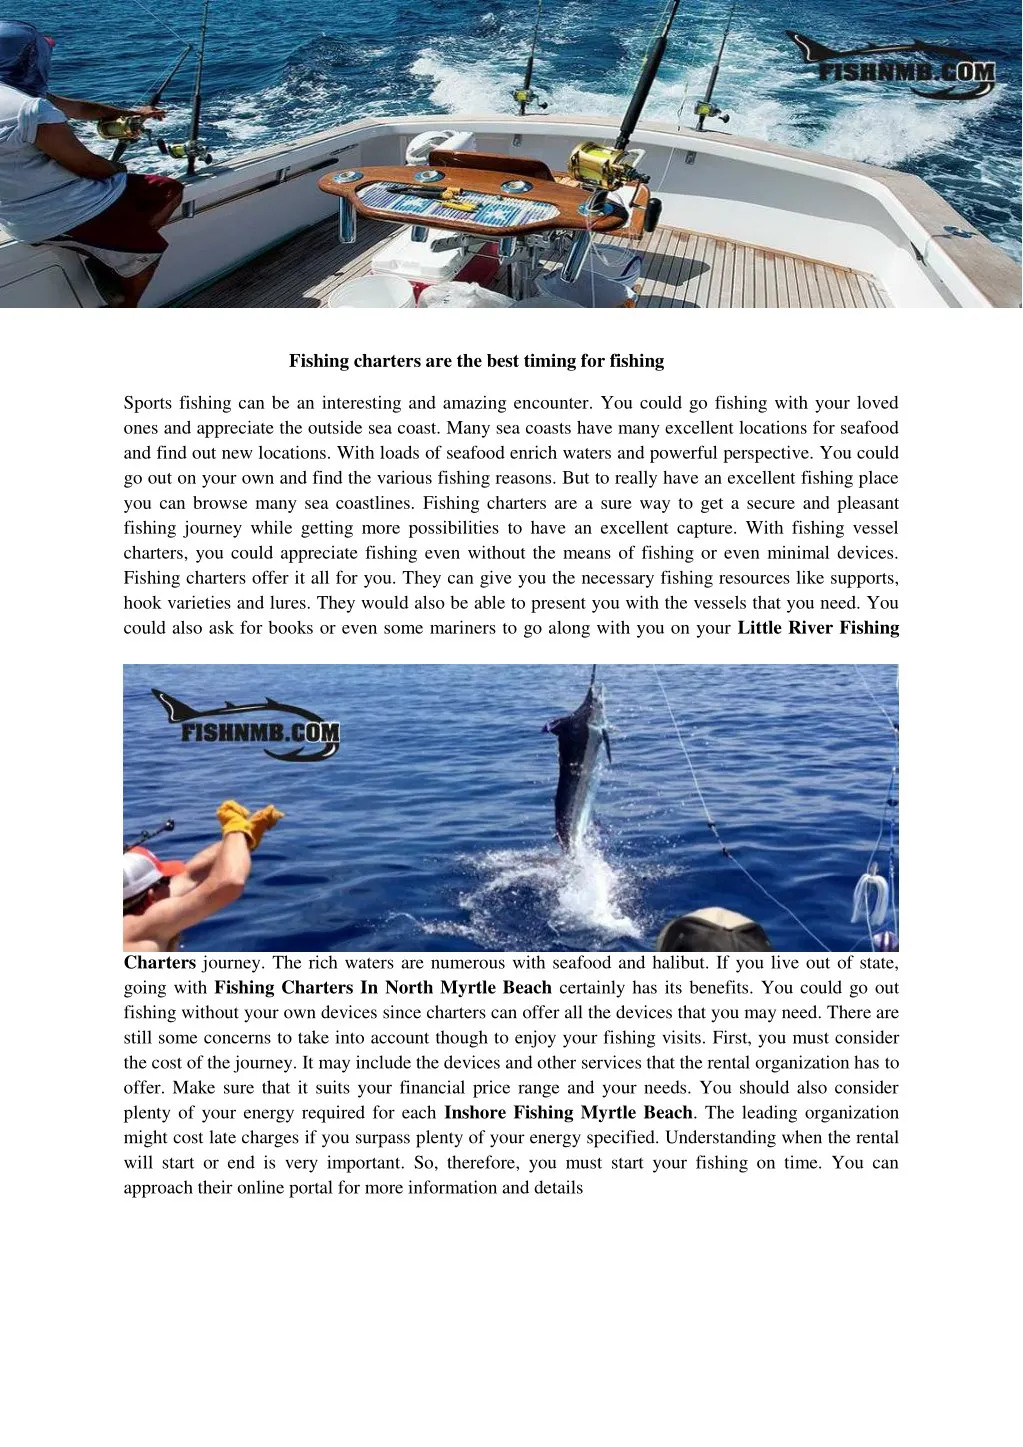 fishing charters are the best timing for fishing